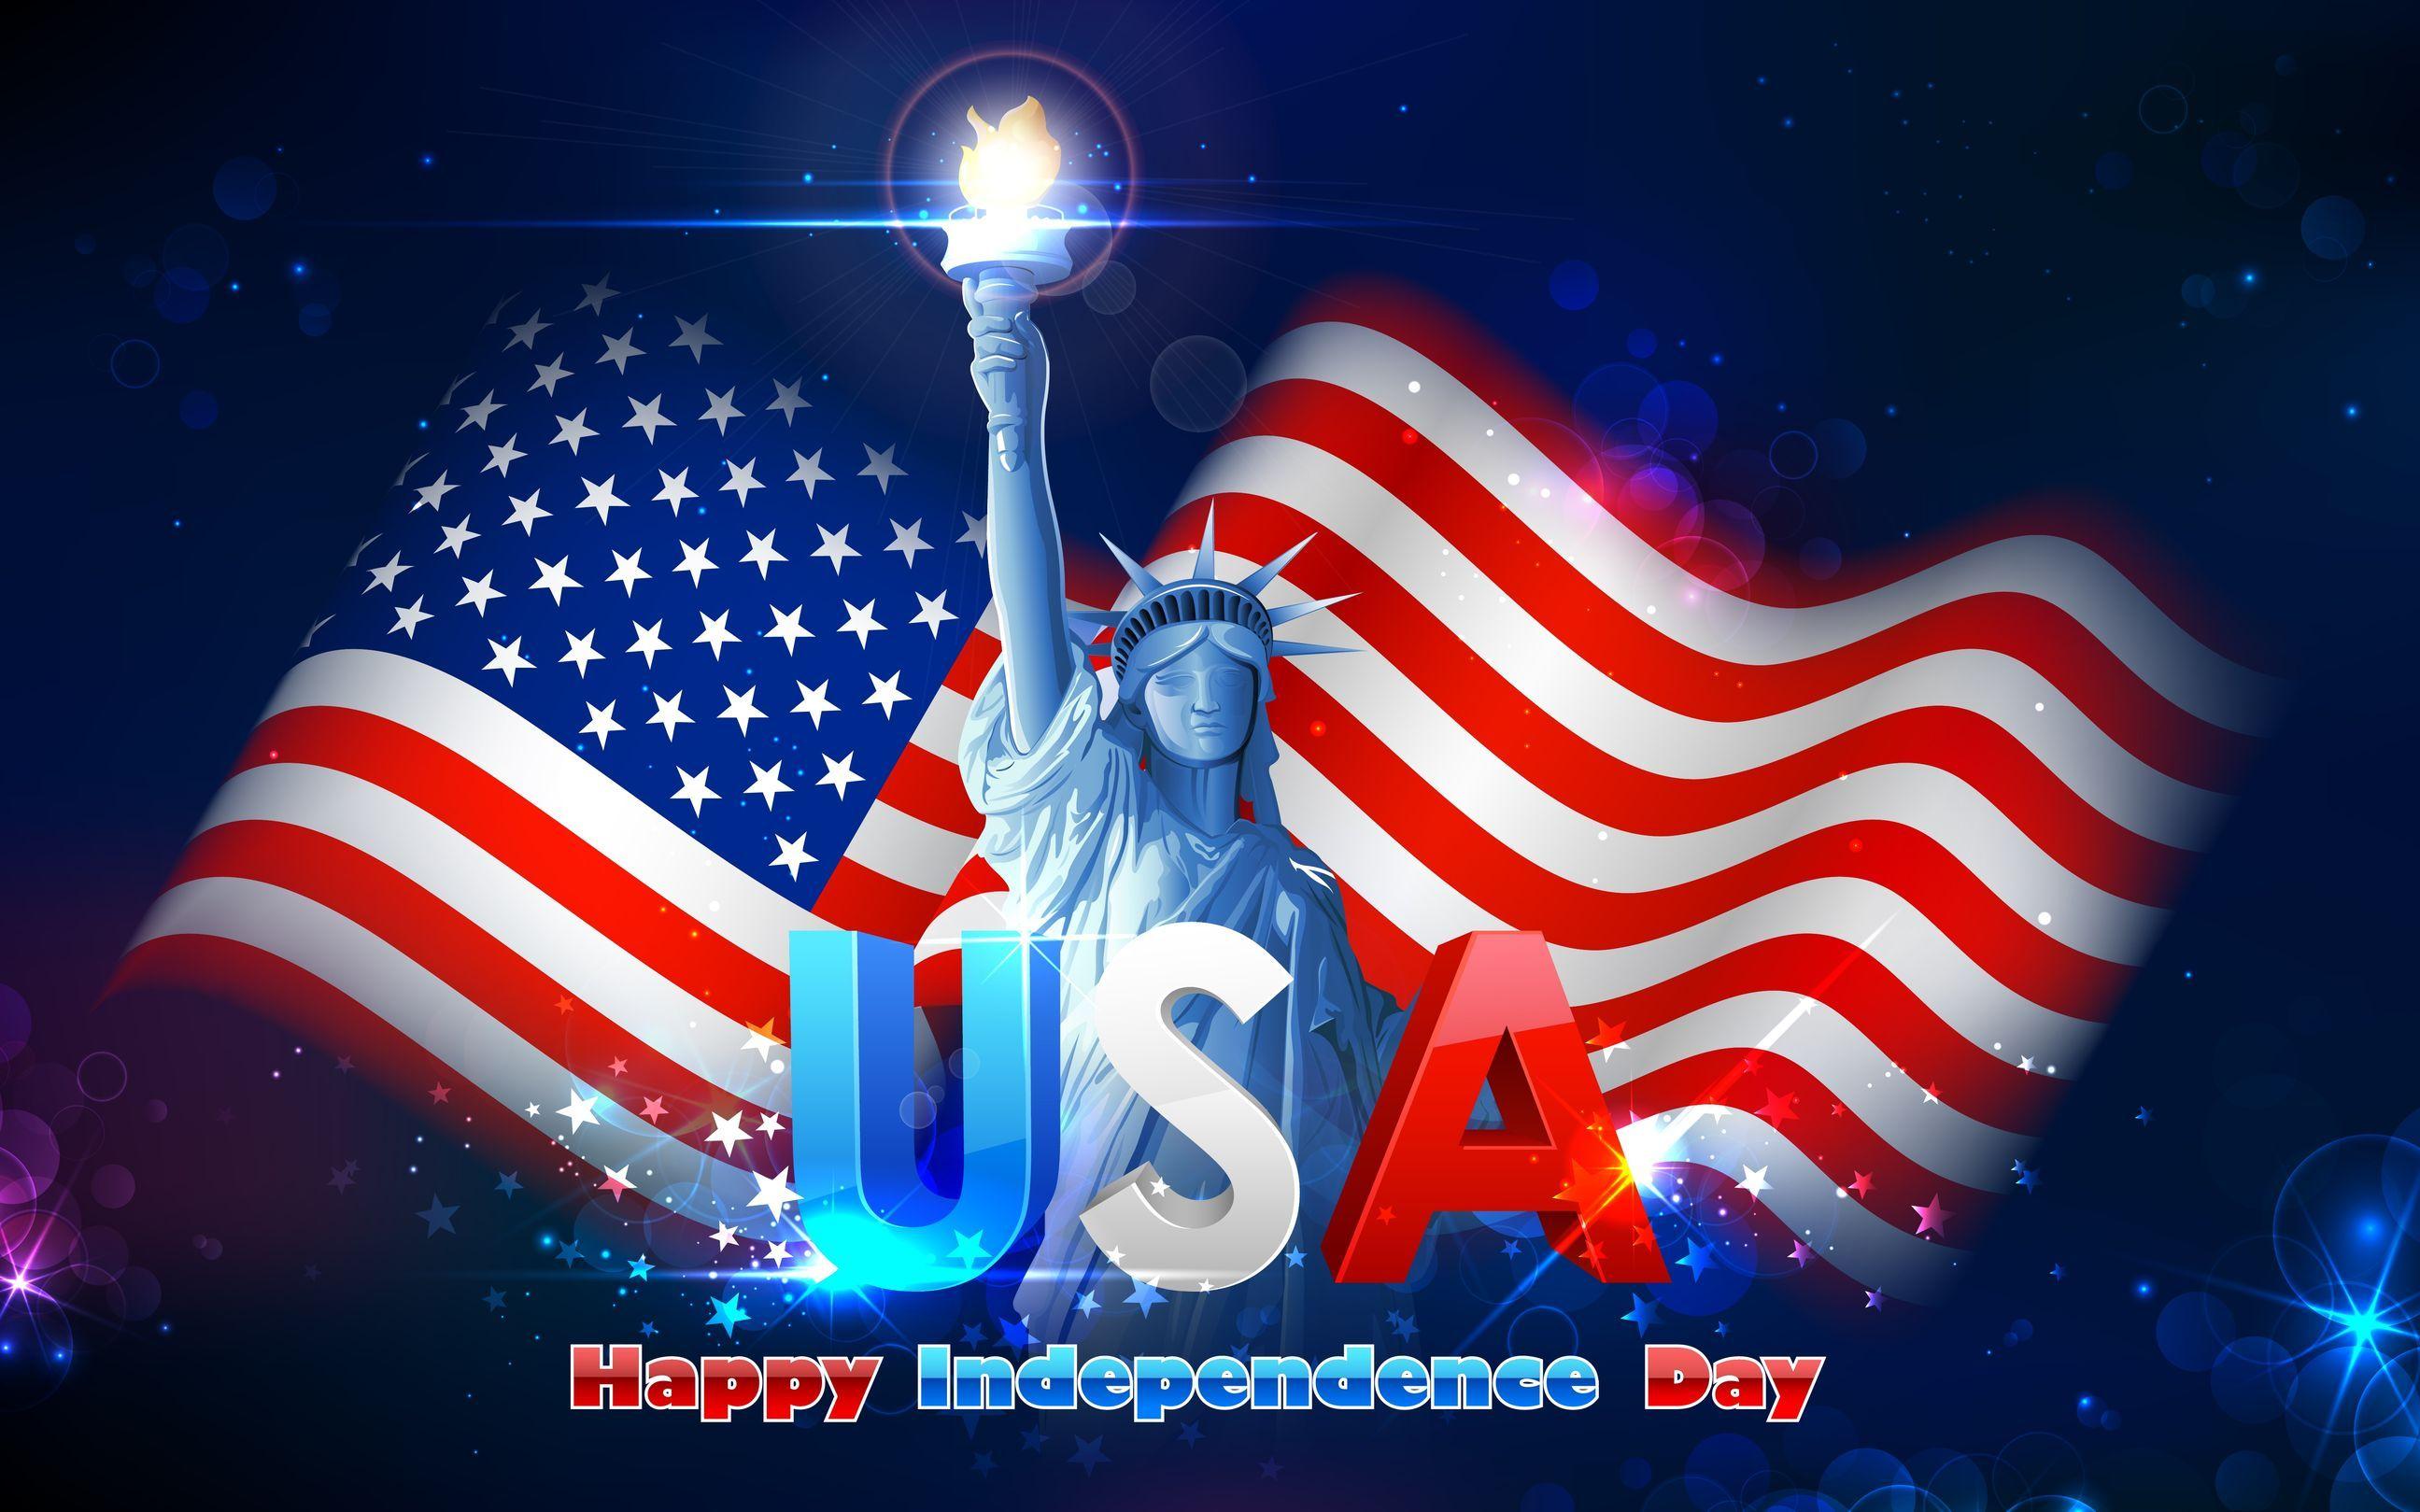 happy 4th of July image 4th of July Image 2018